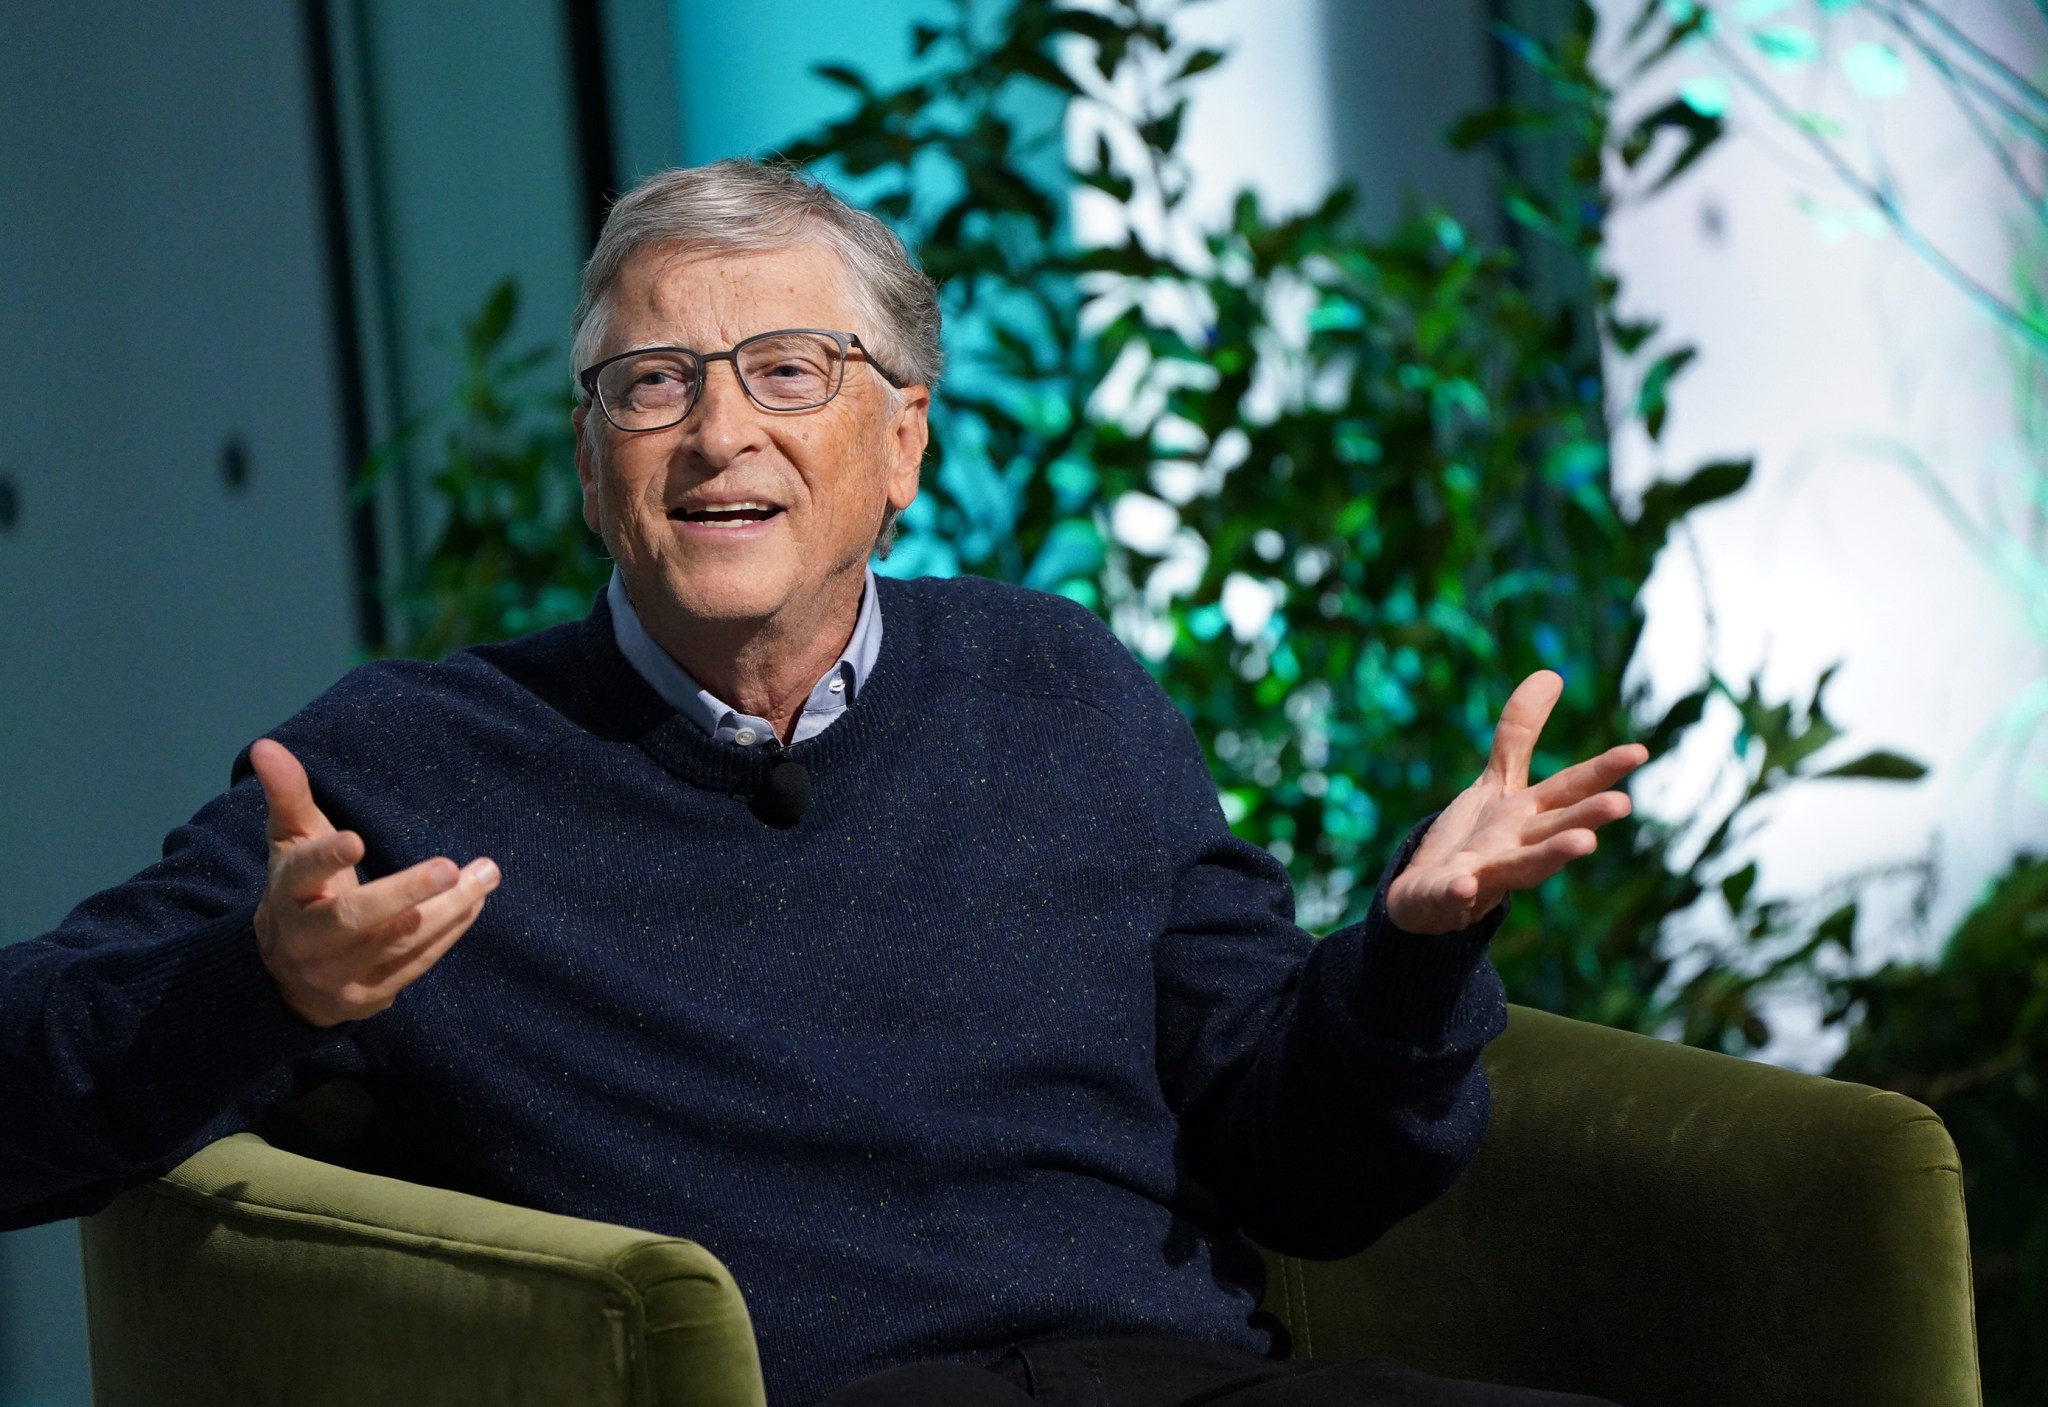 Bill Gates on climate change: Planting trees is ‘complete nonsense’